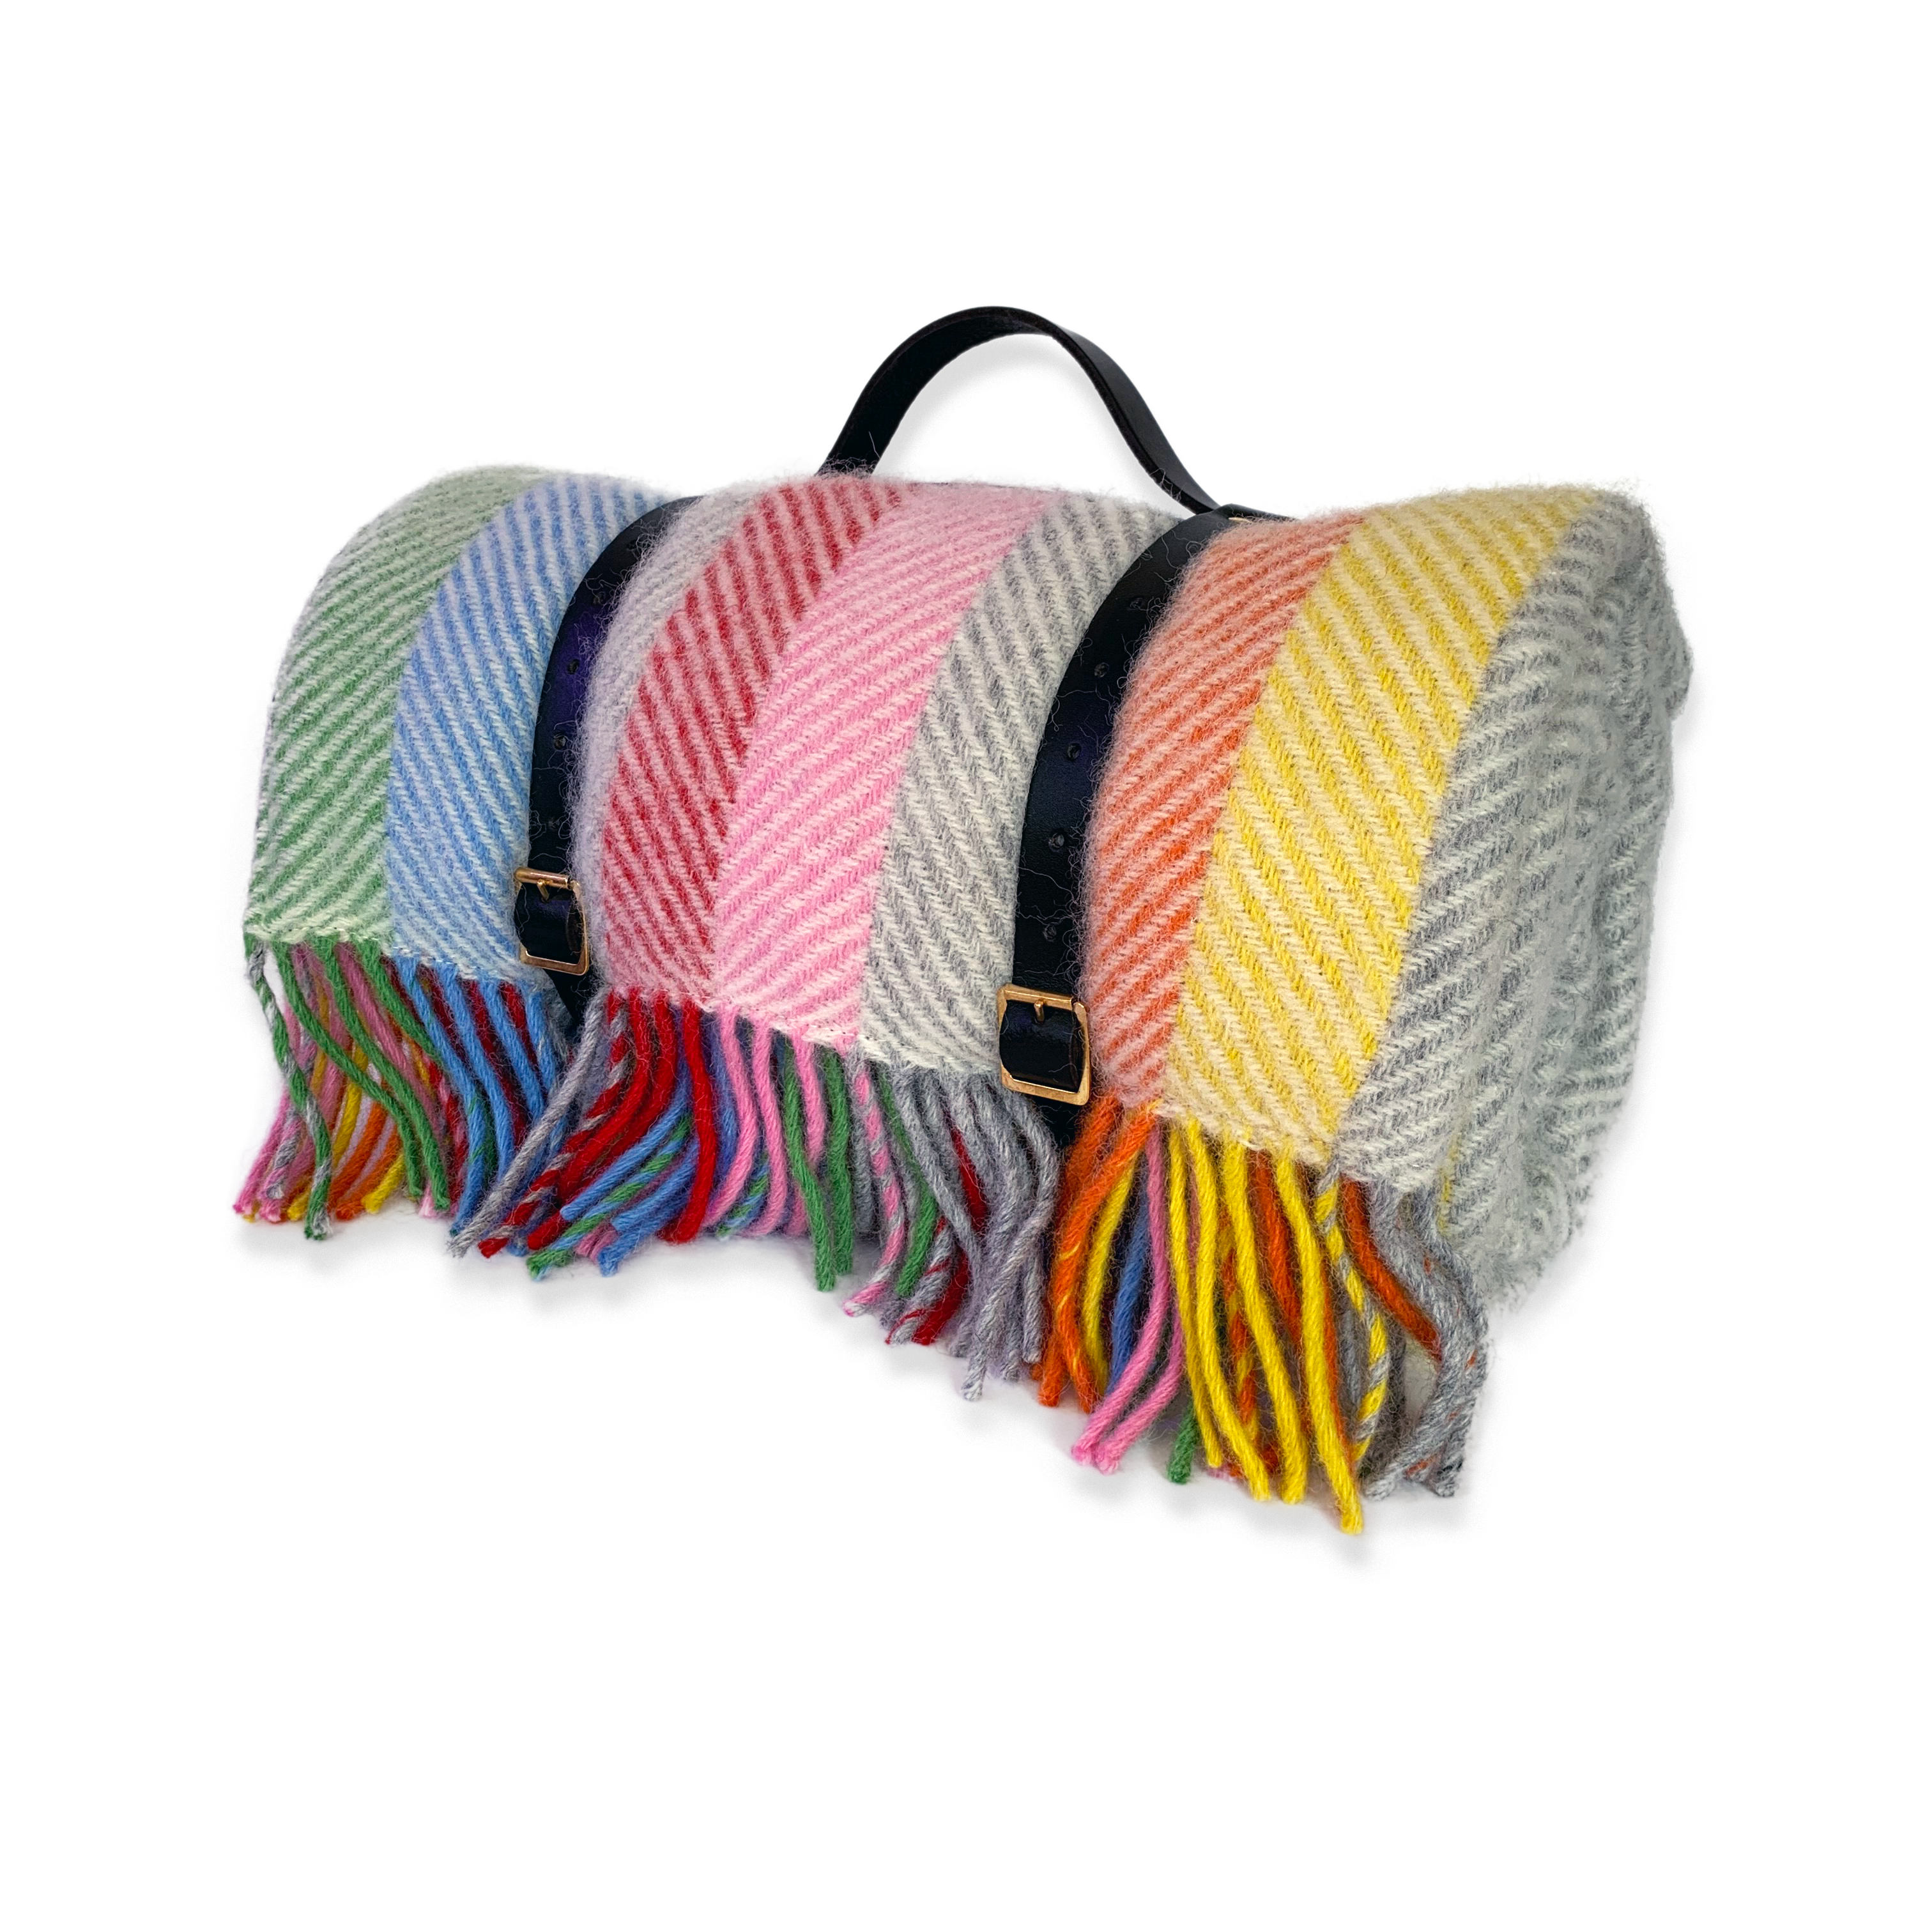 Rainbow Stripe Waterproof Picnic Blanket with Straps – with the